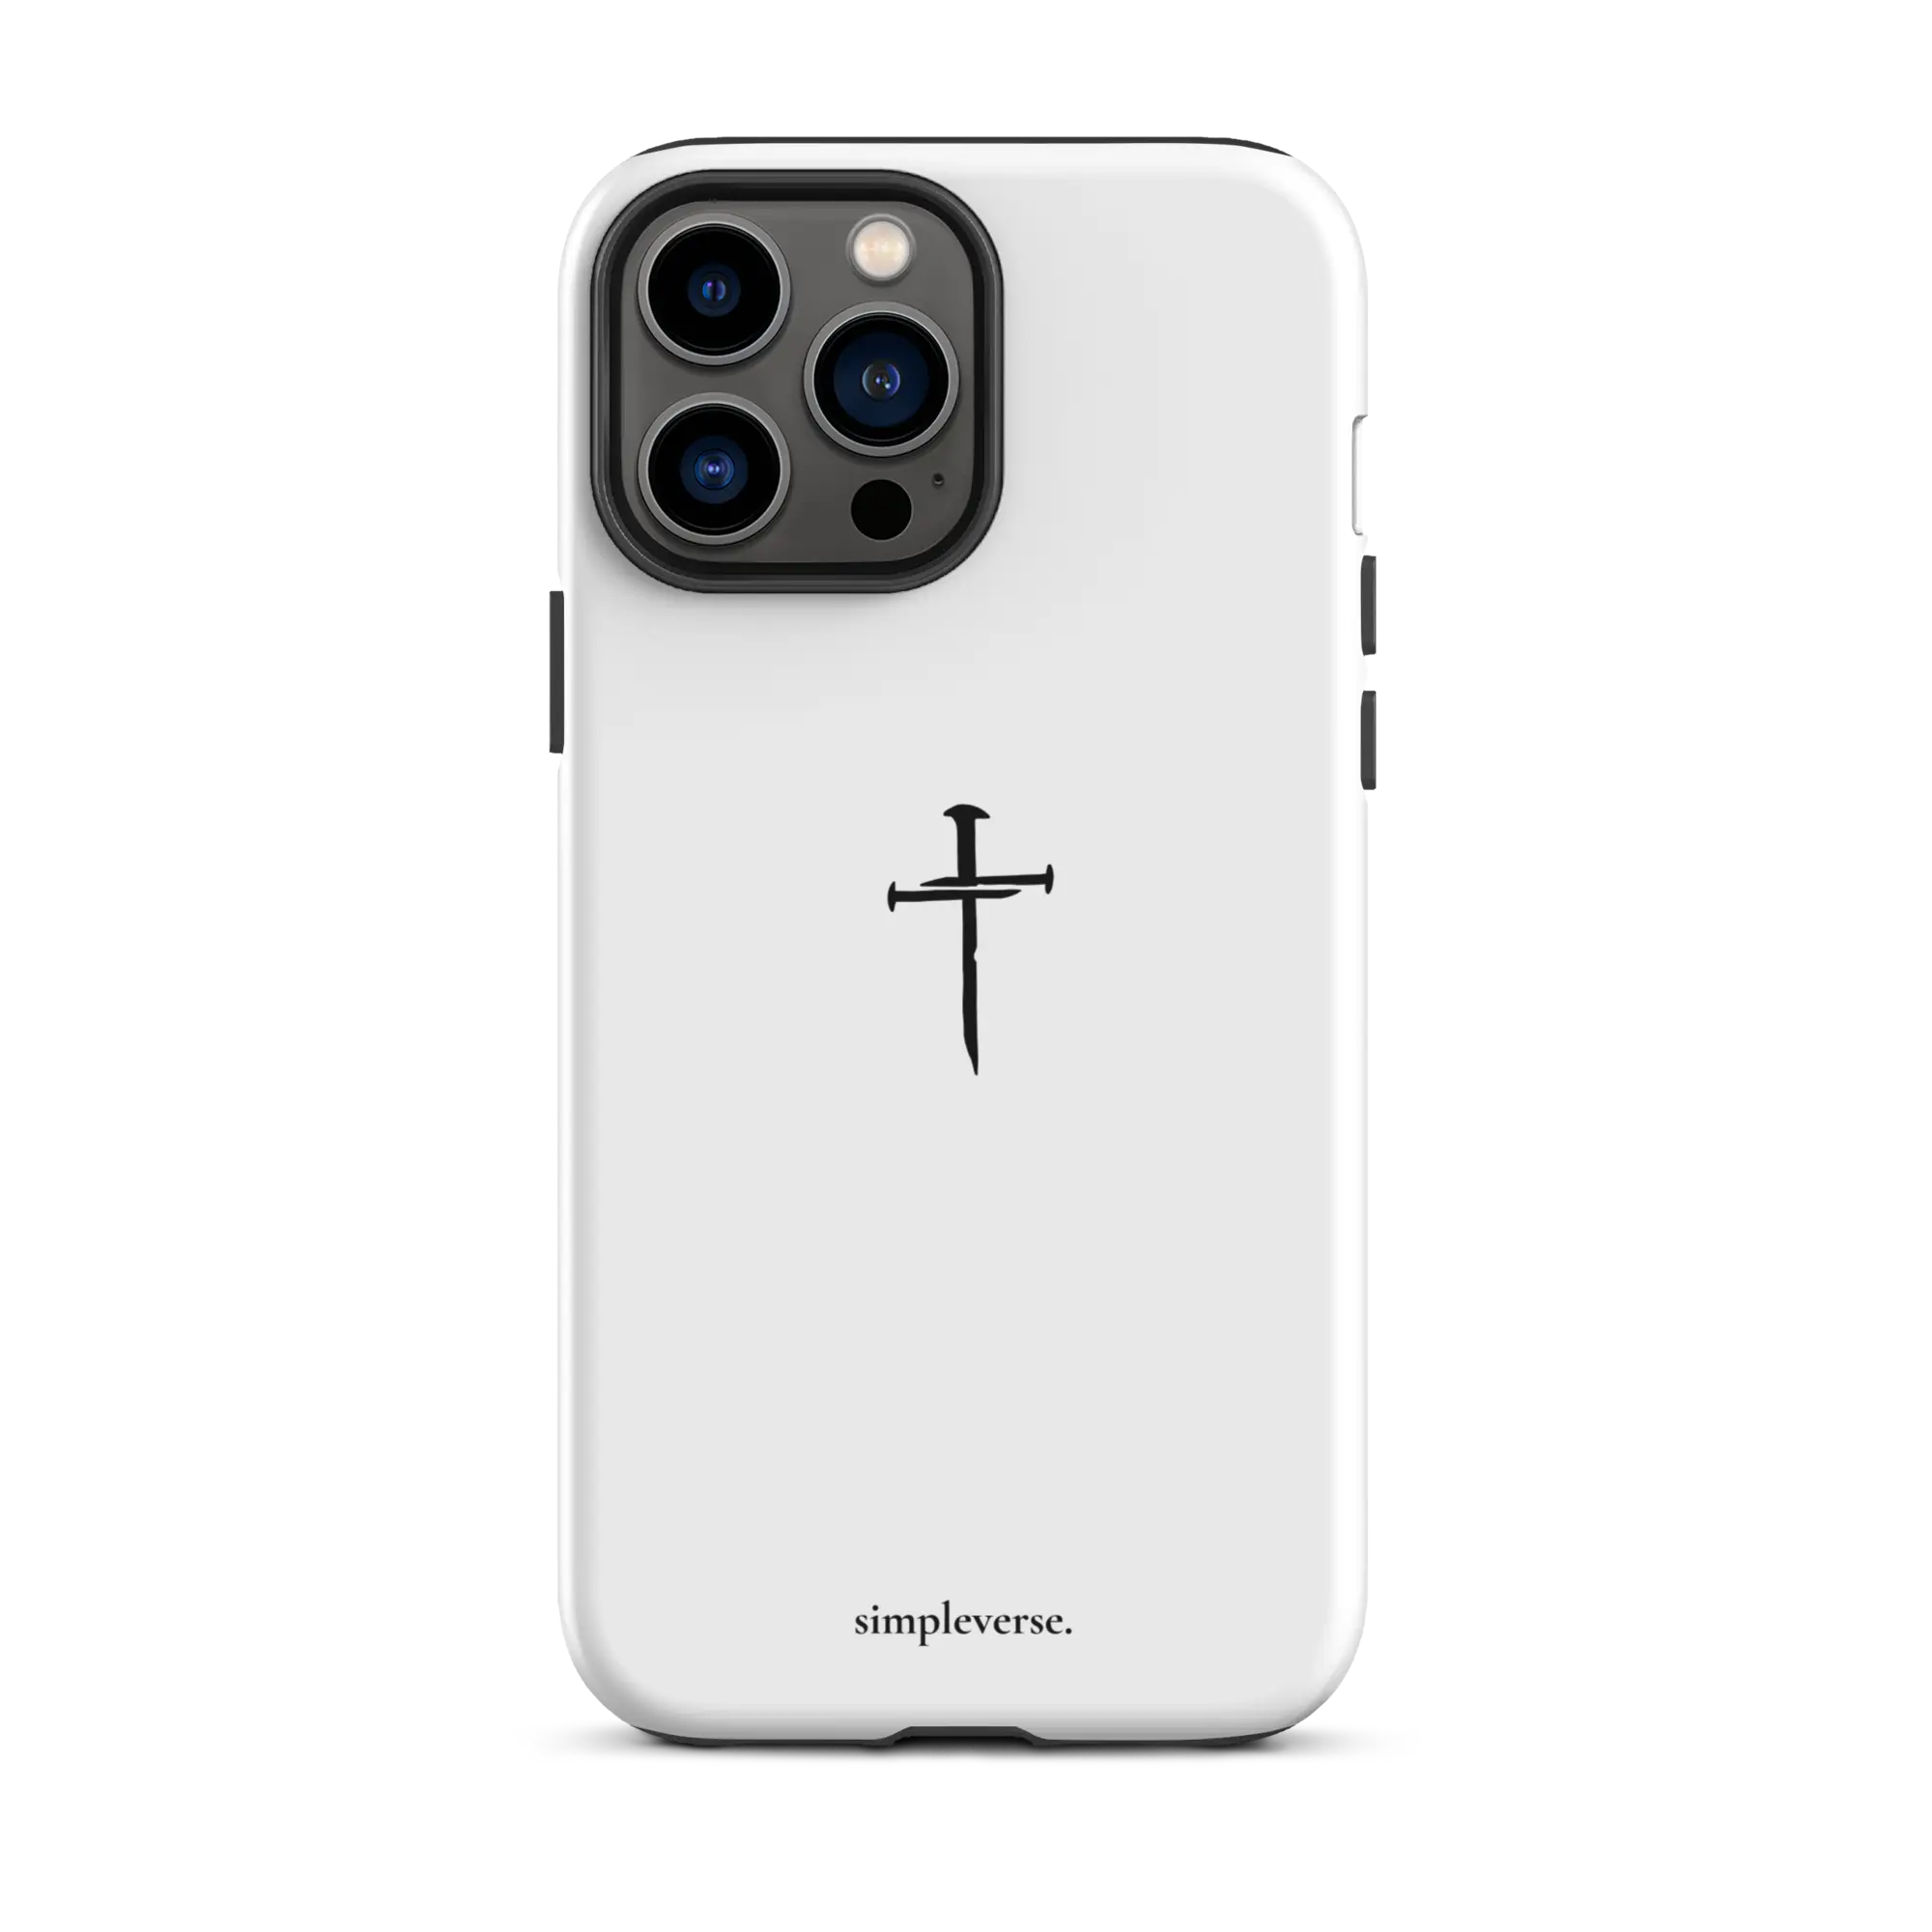 Minimalist white Christian iPhone case with a striking nail cross symbol, a sleek expression of Christian belief.